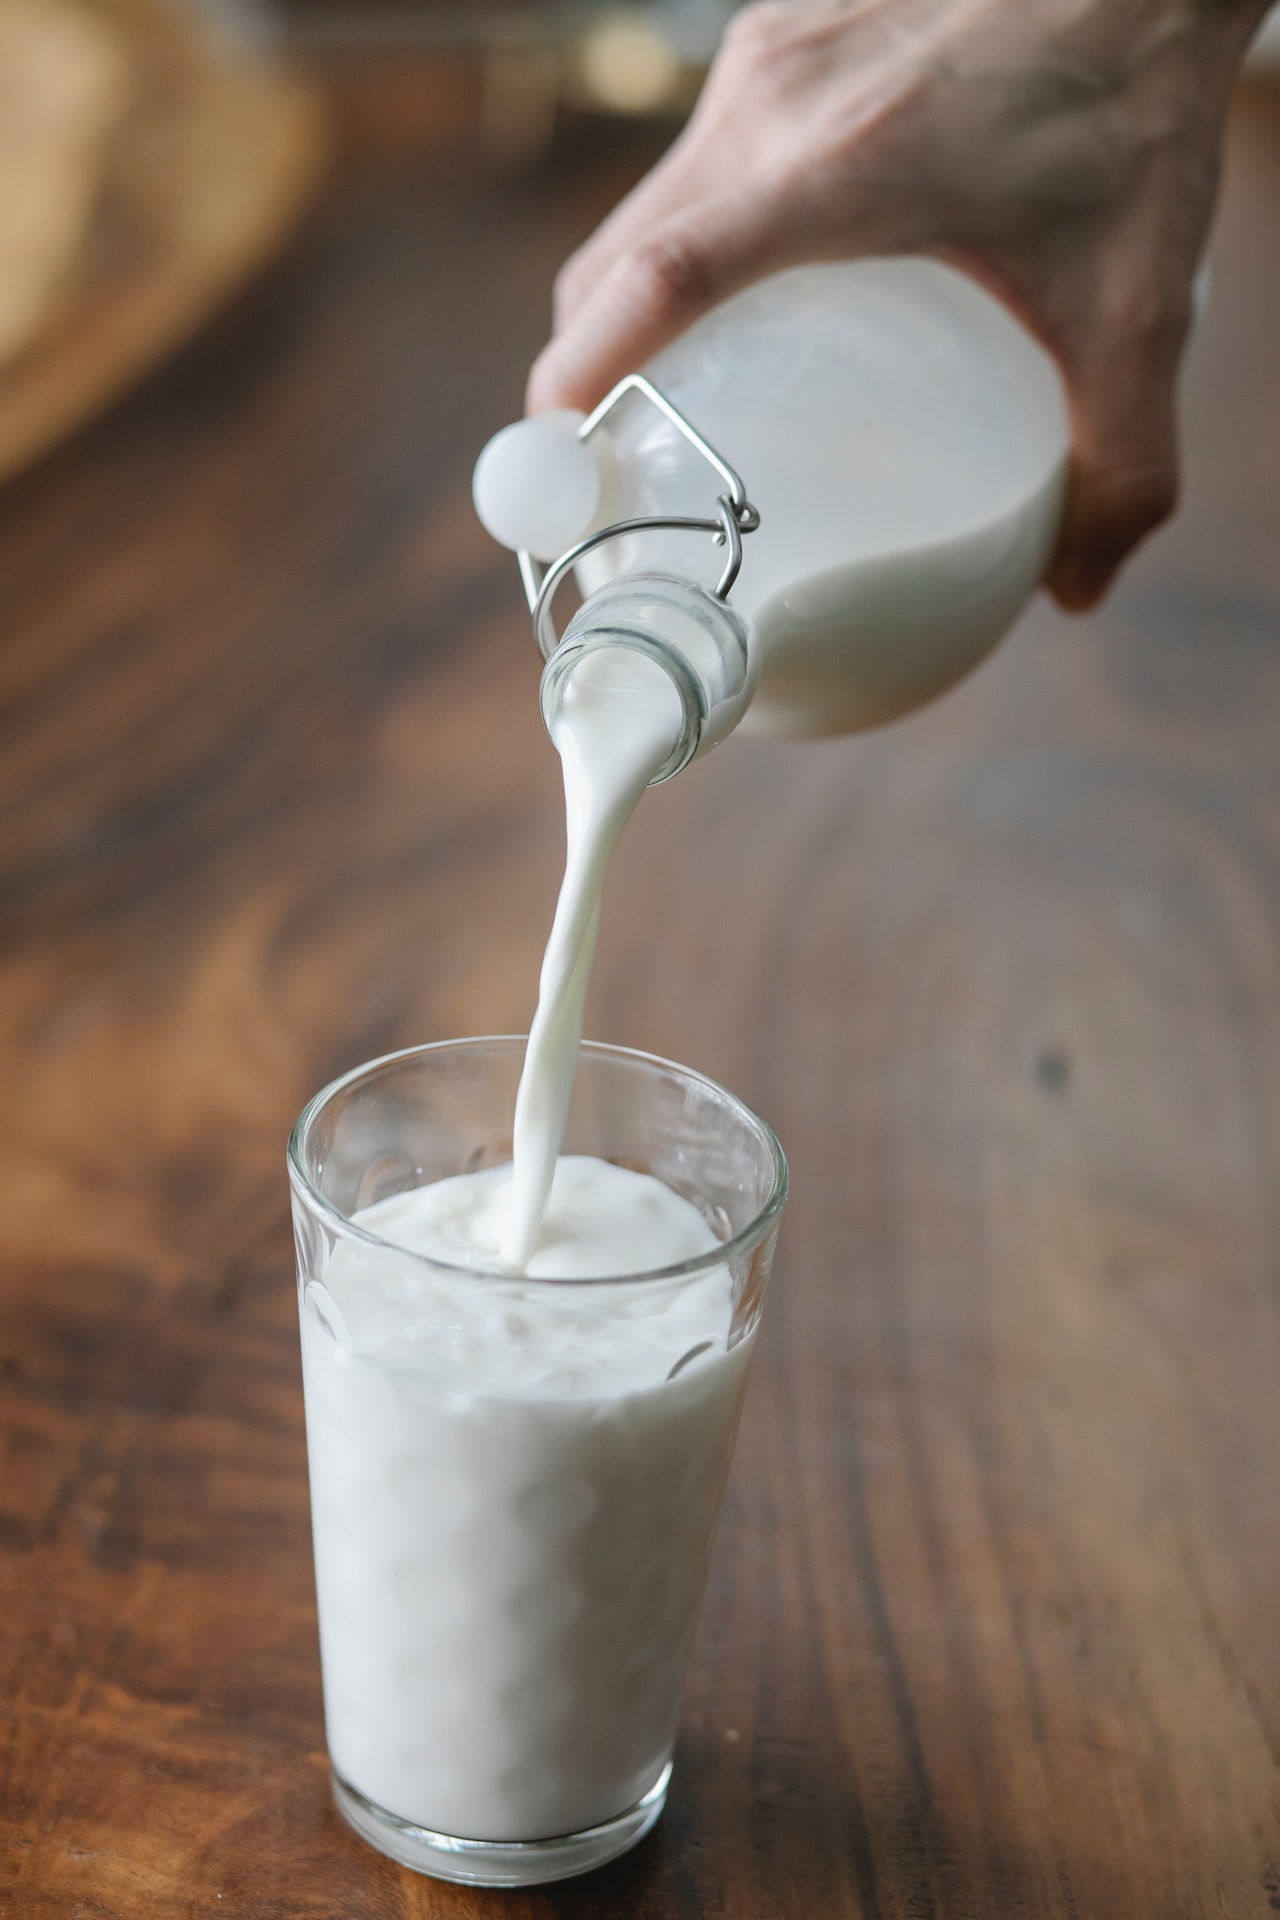 Dairy products and inflammatory foods to avoid